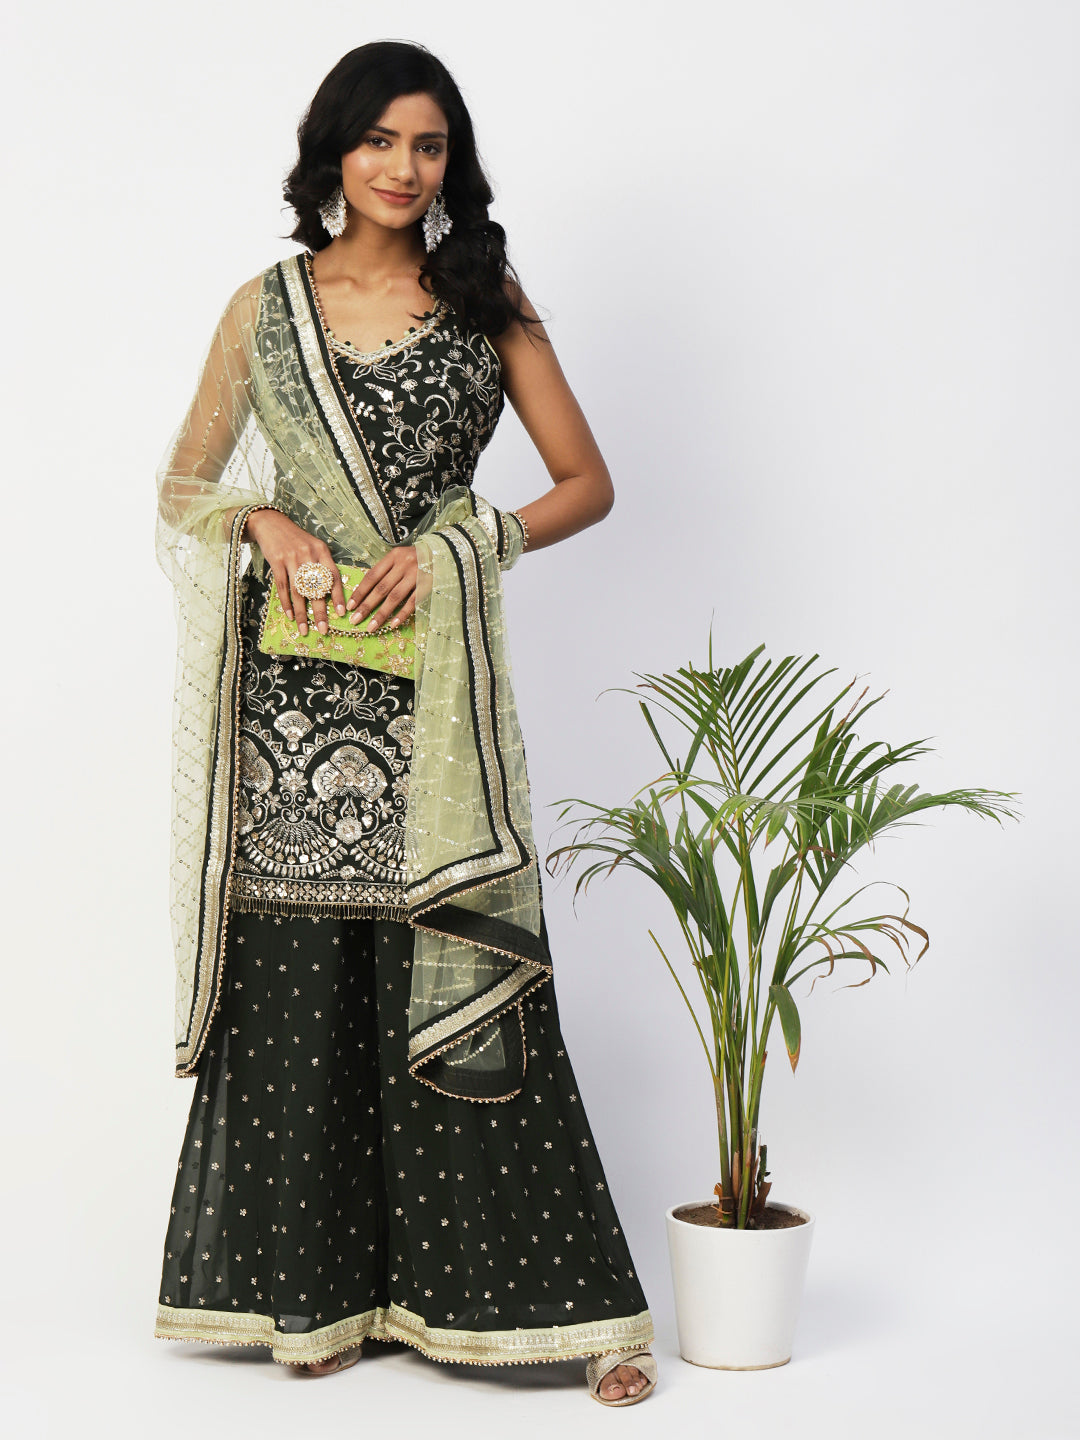 Green Georgette Sharara Suit with Gold Embroidery from PepaBai